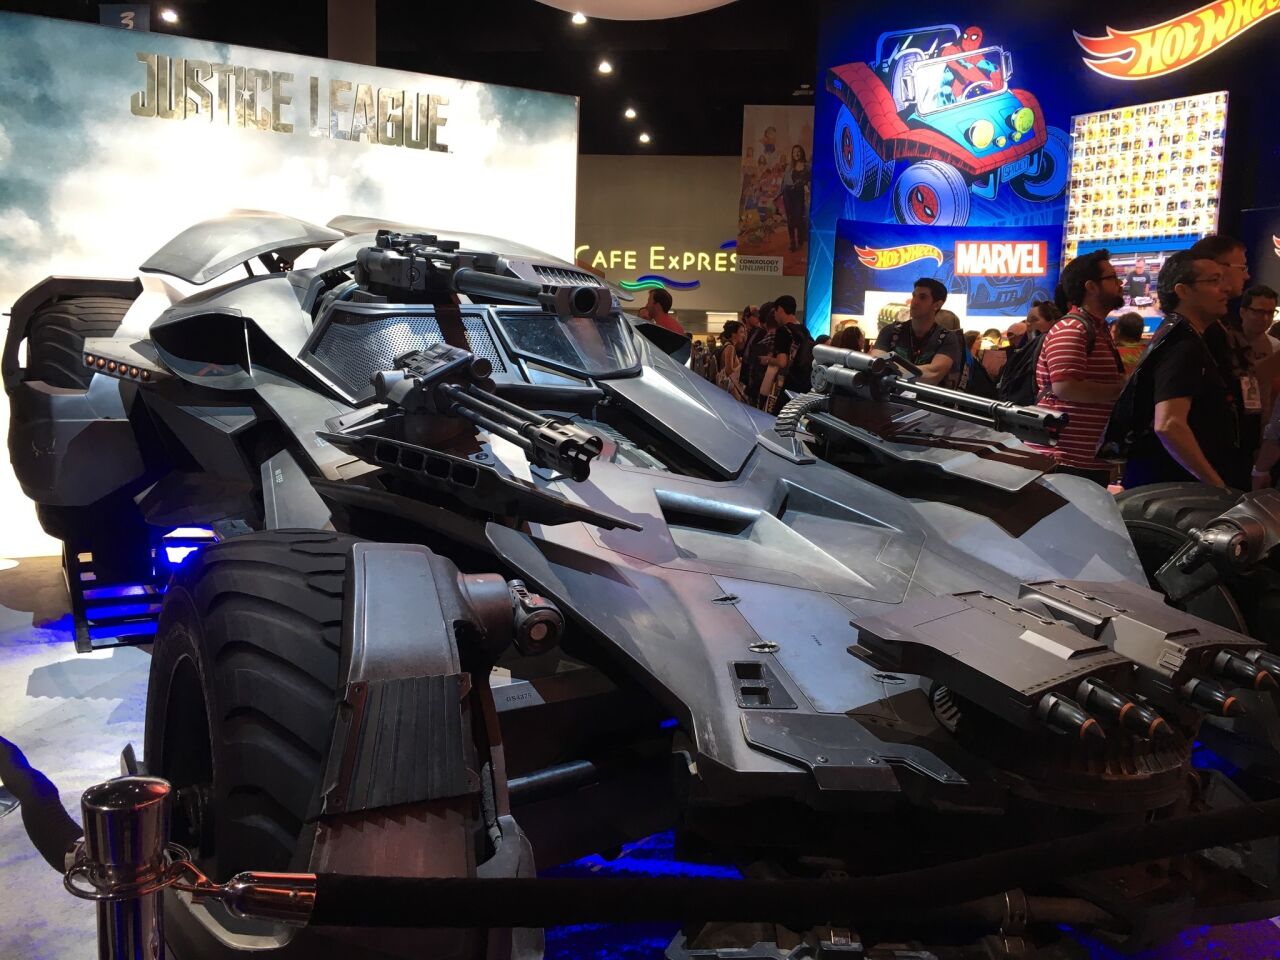 The Batmobile is on display at the DC Entertainment booth.